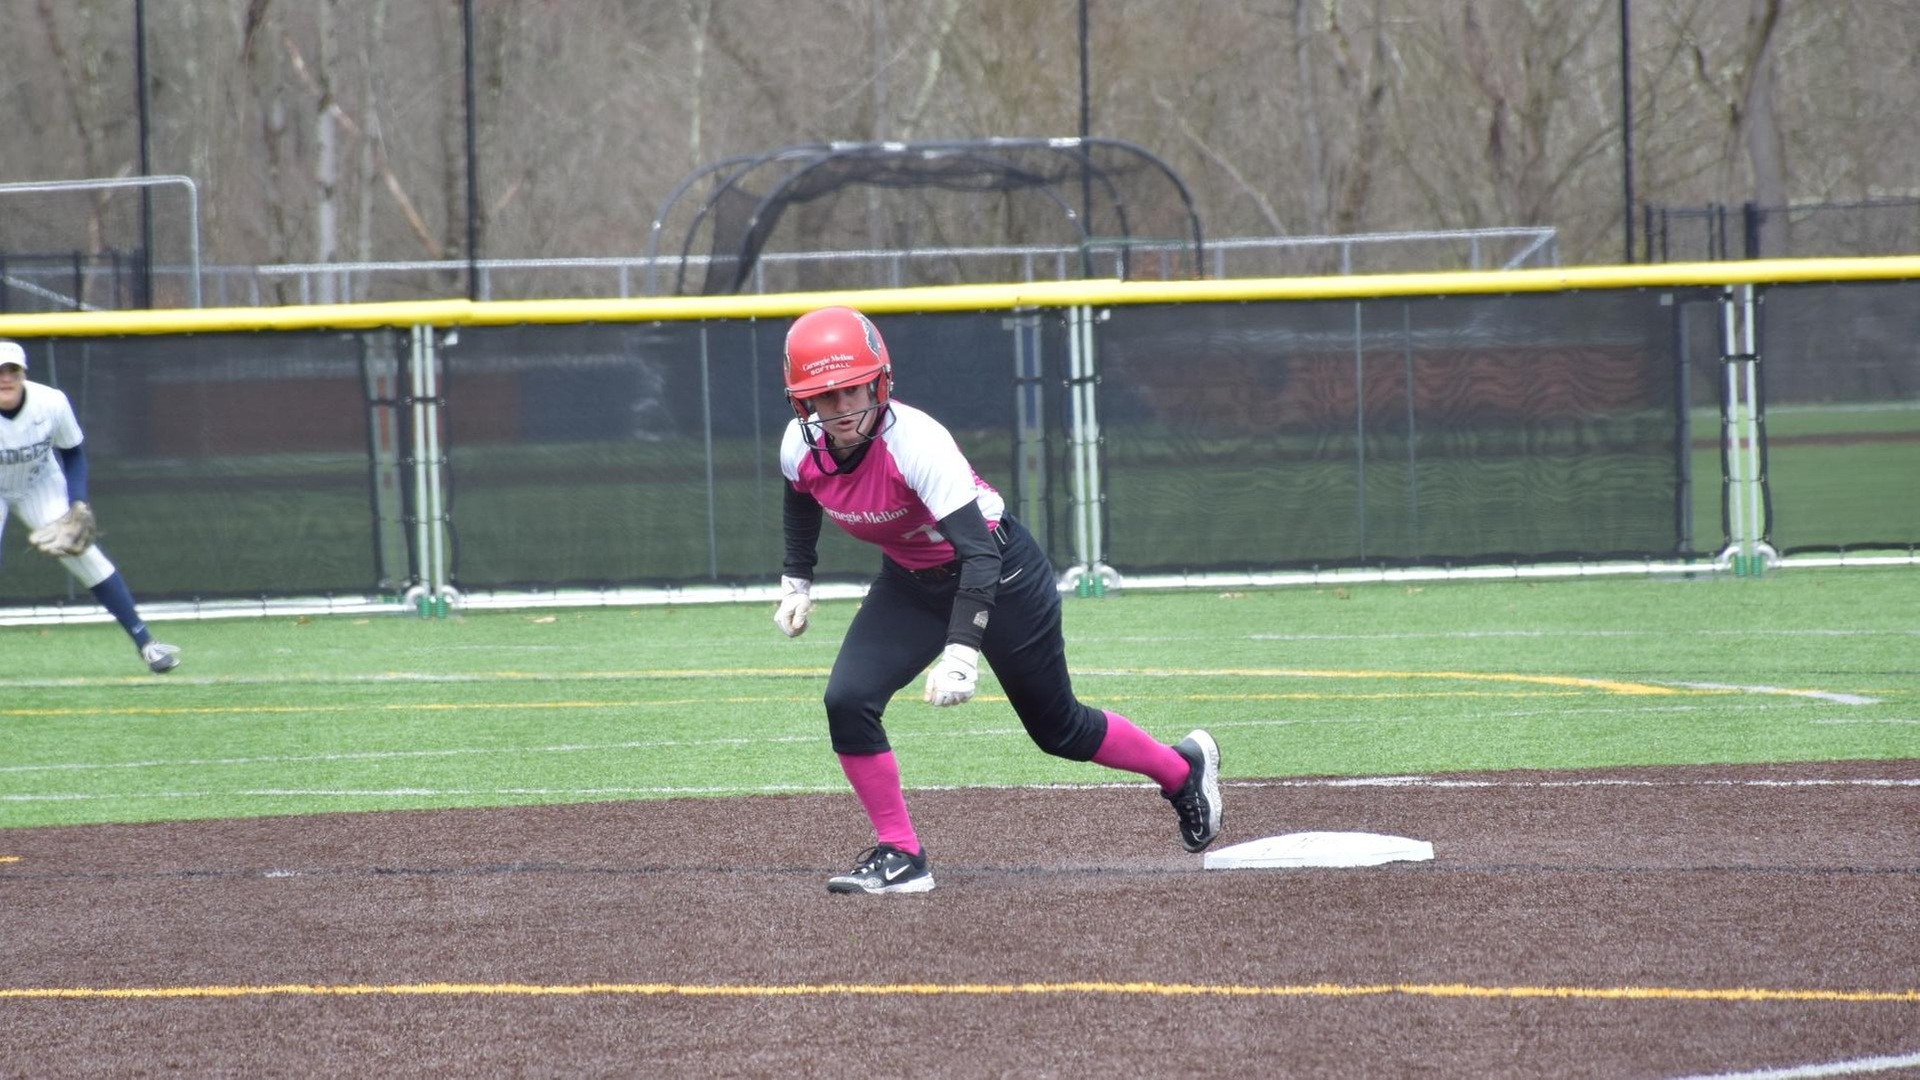 women's softball player leading off second base